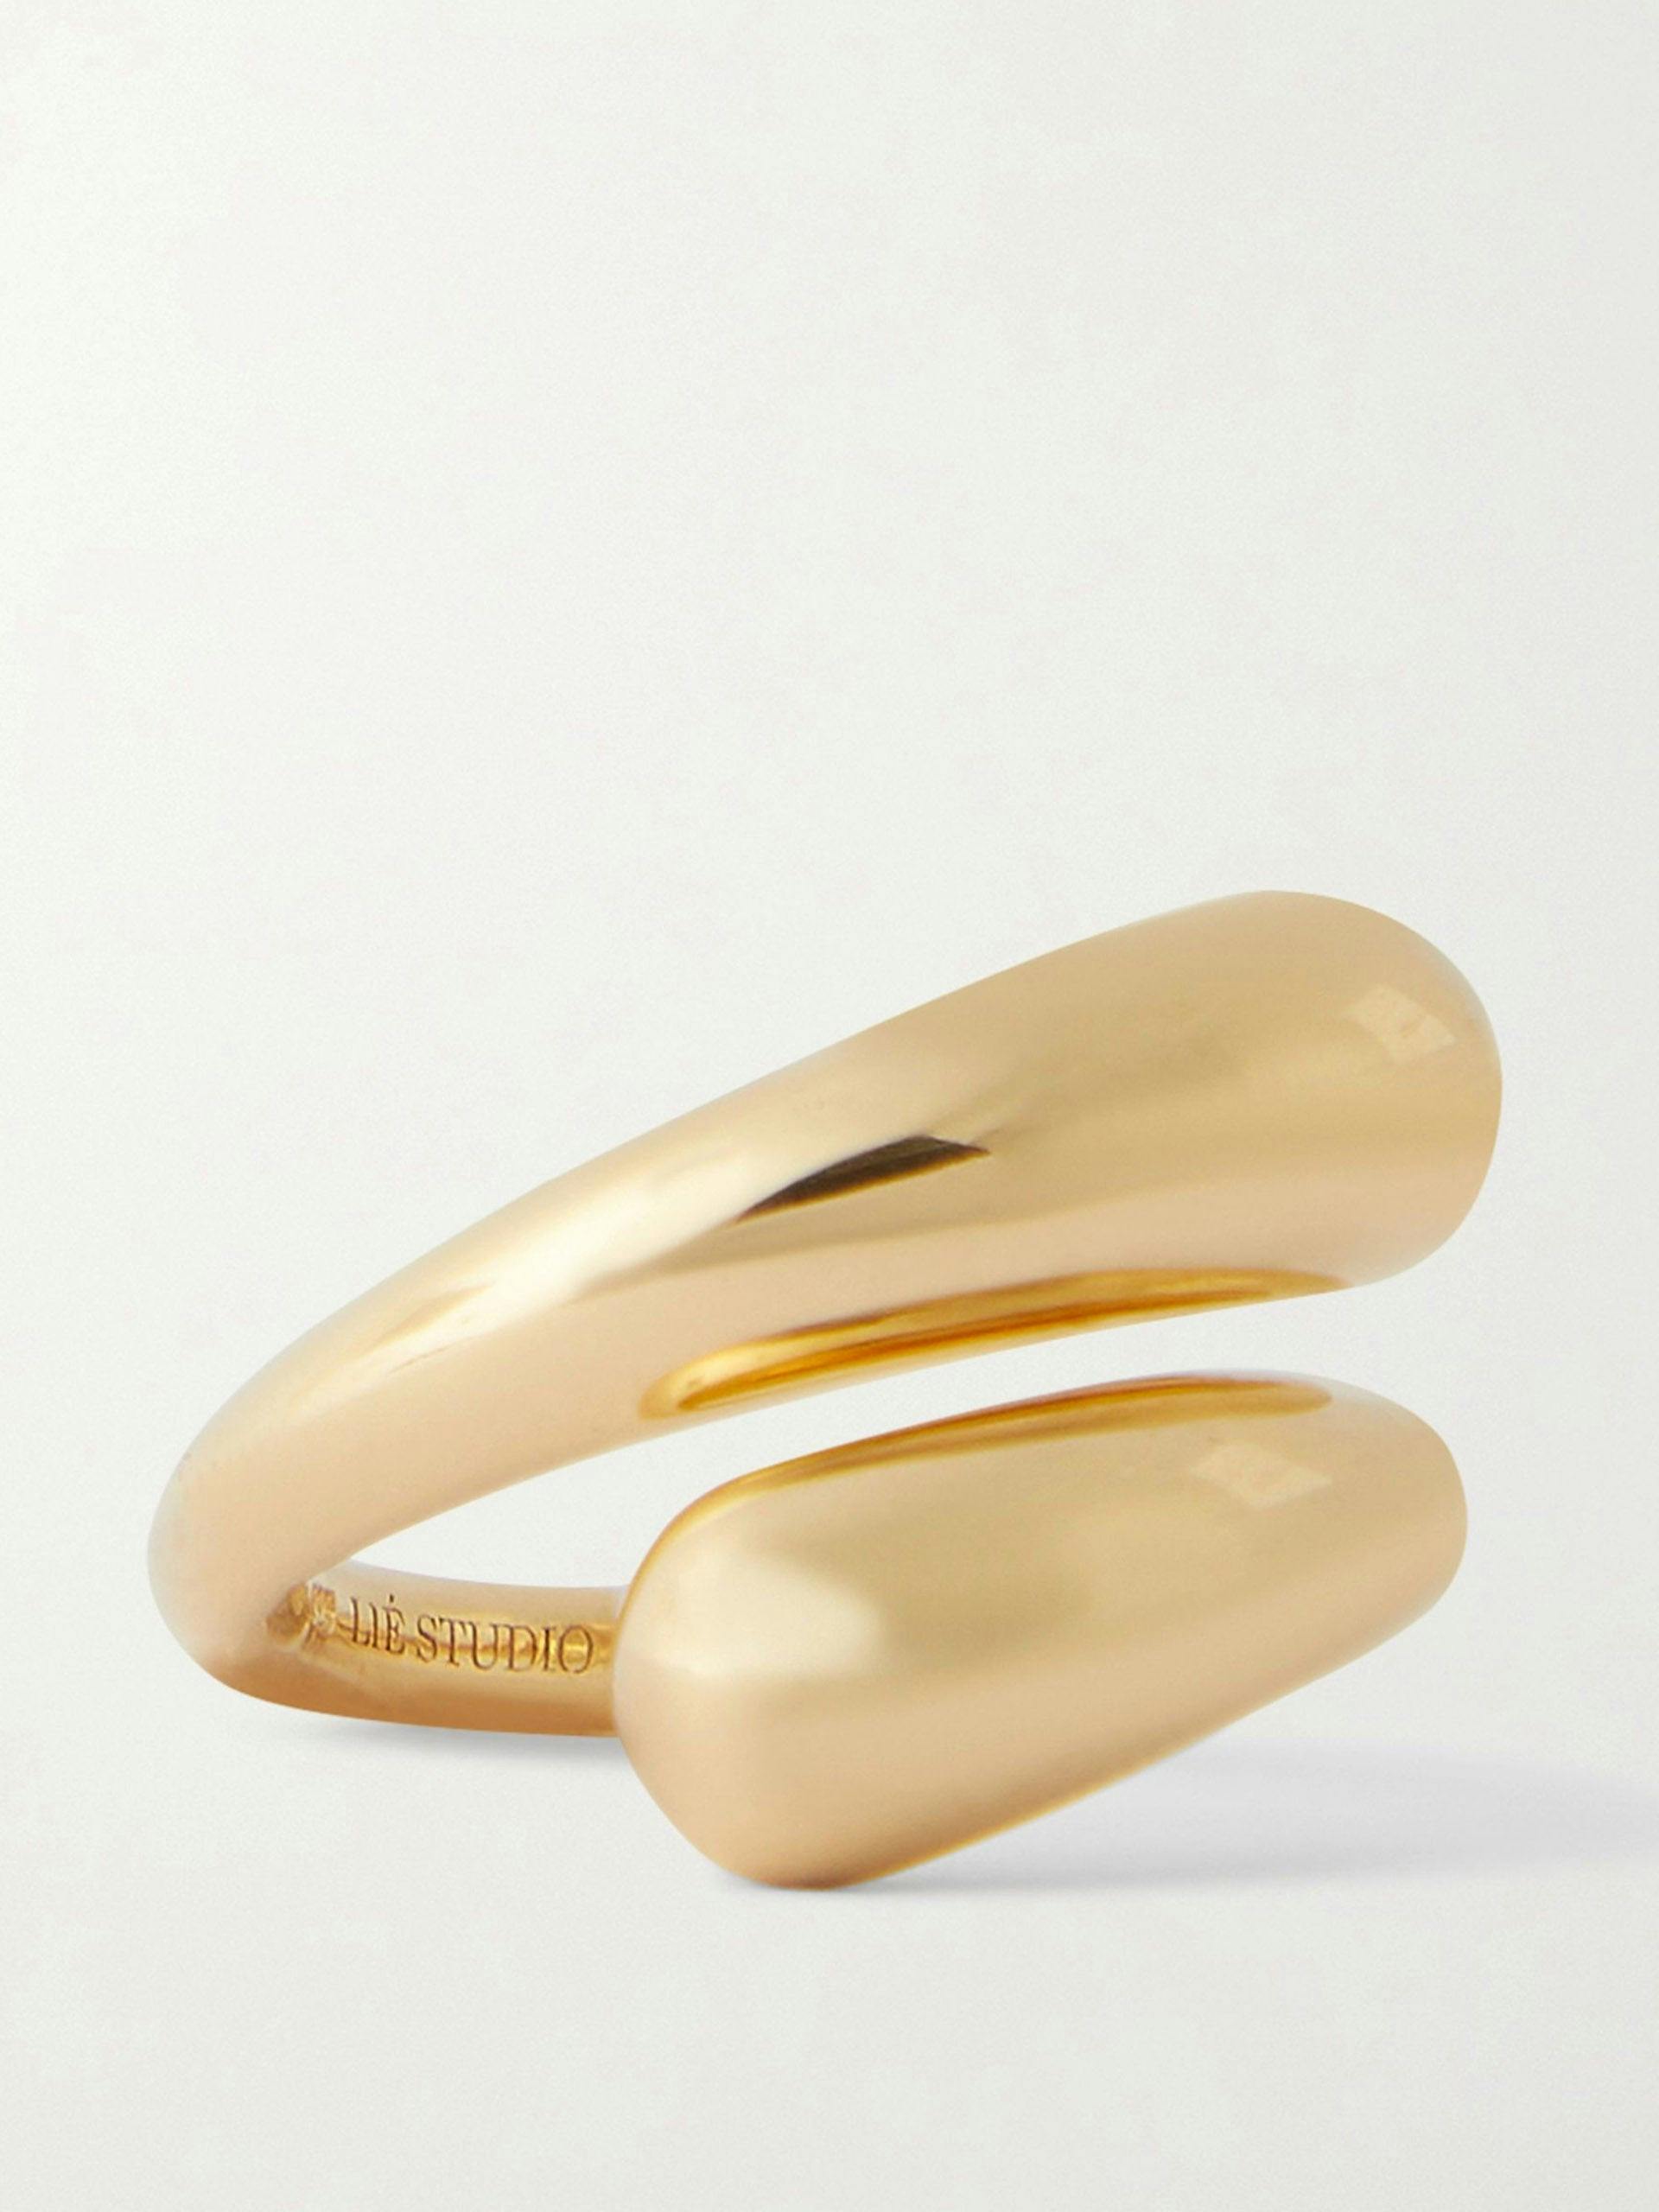 The Victoria gold-plated ring